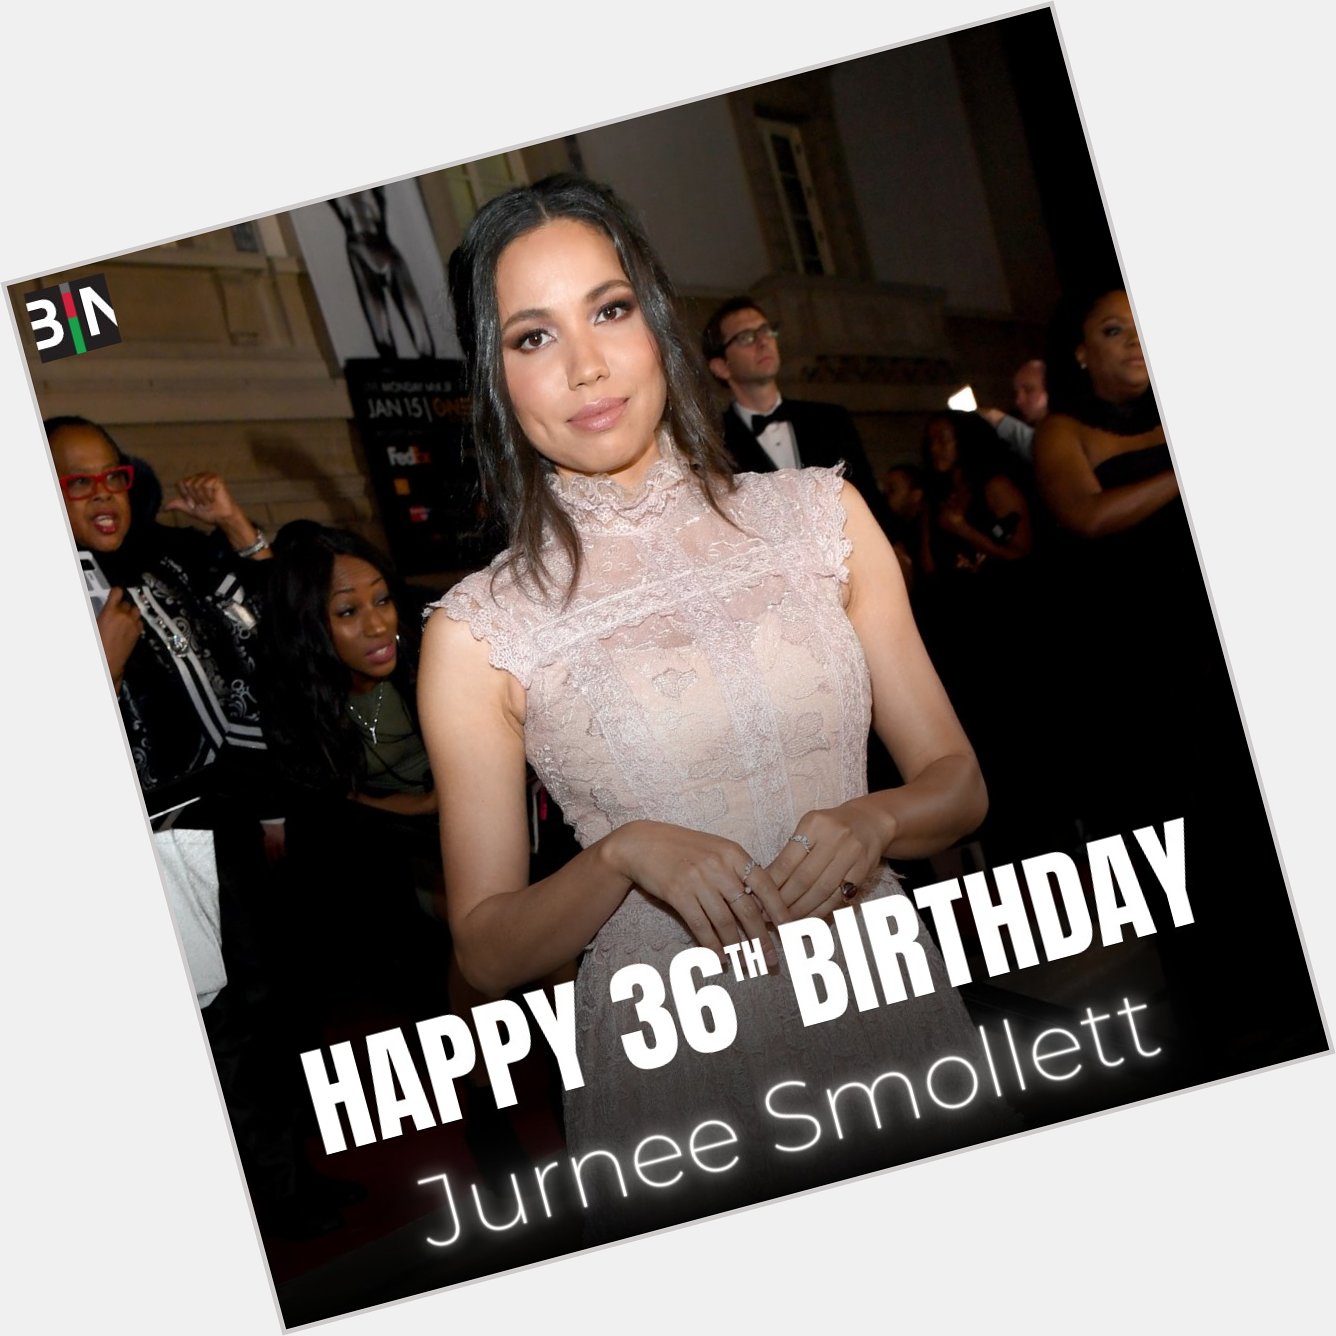 Happy Birthday   Did you know Jurnee Smollett is the younger sister of Jussie Smollett? 